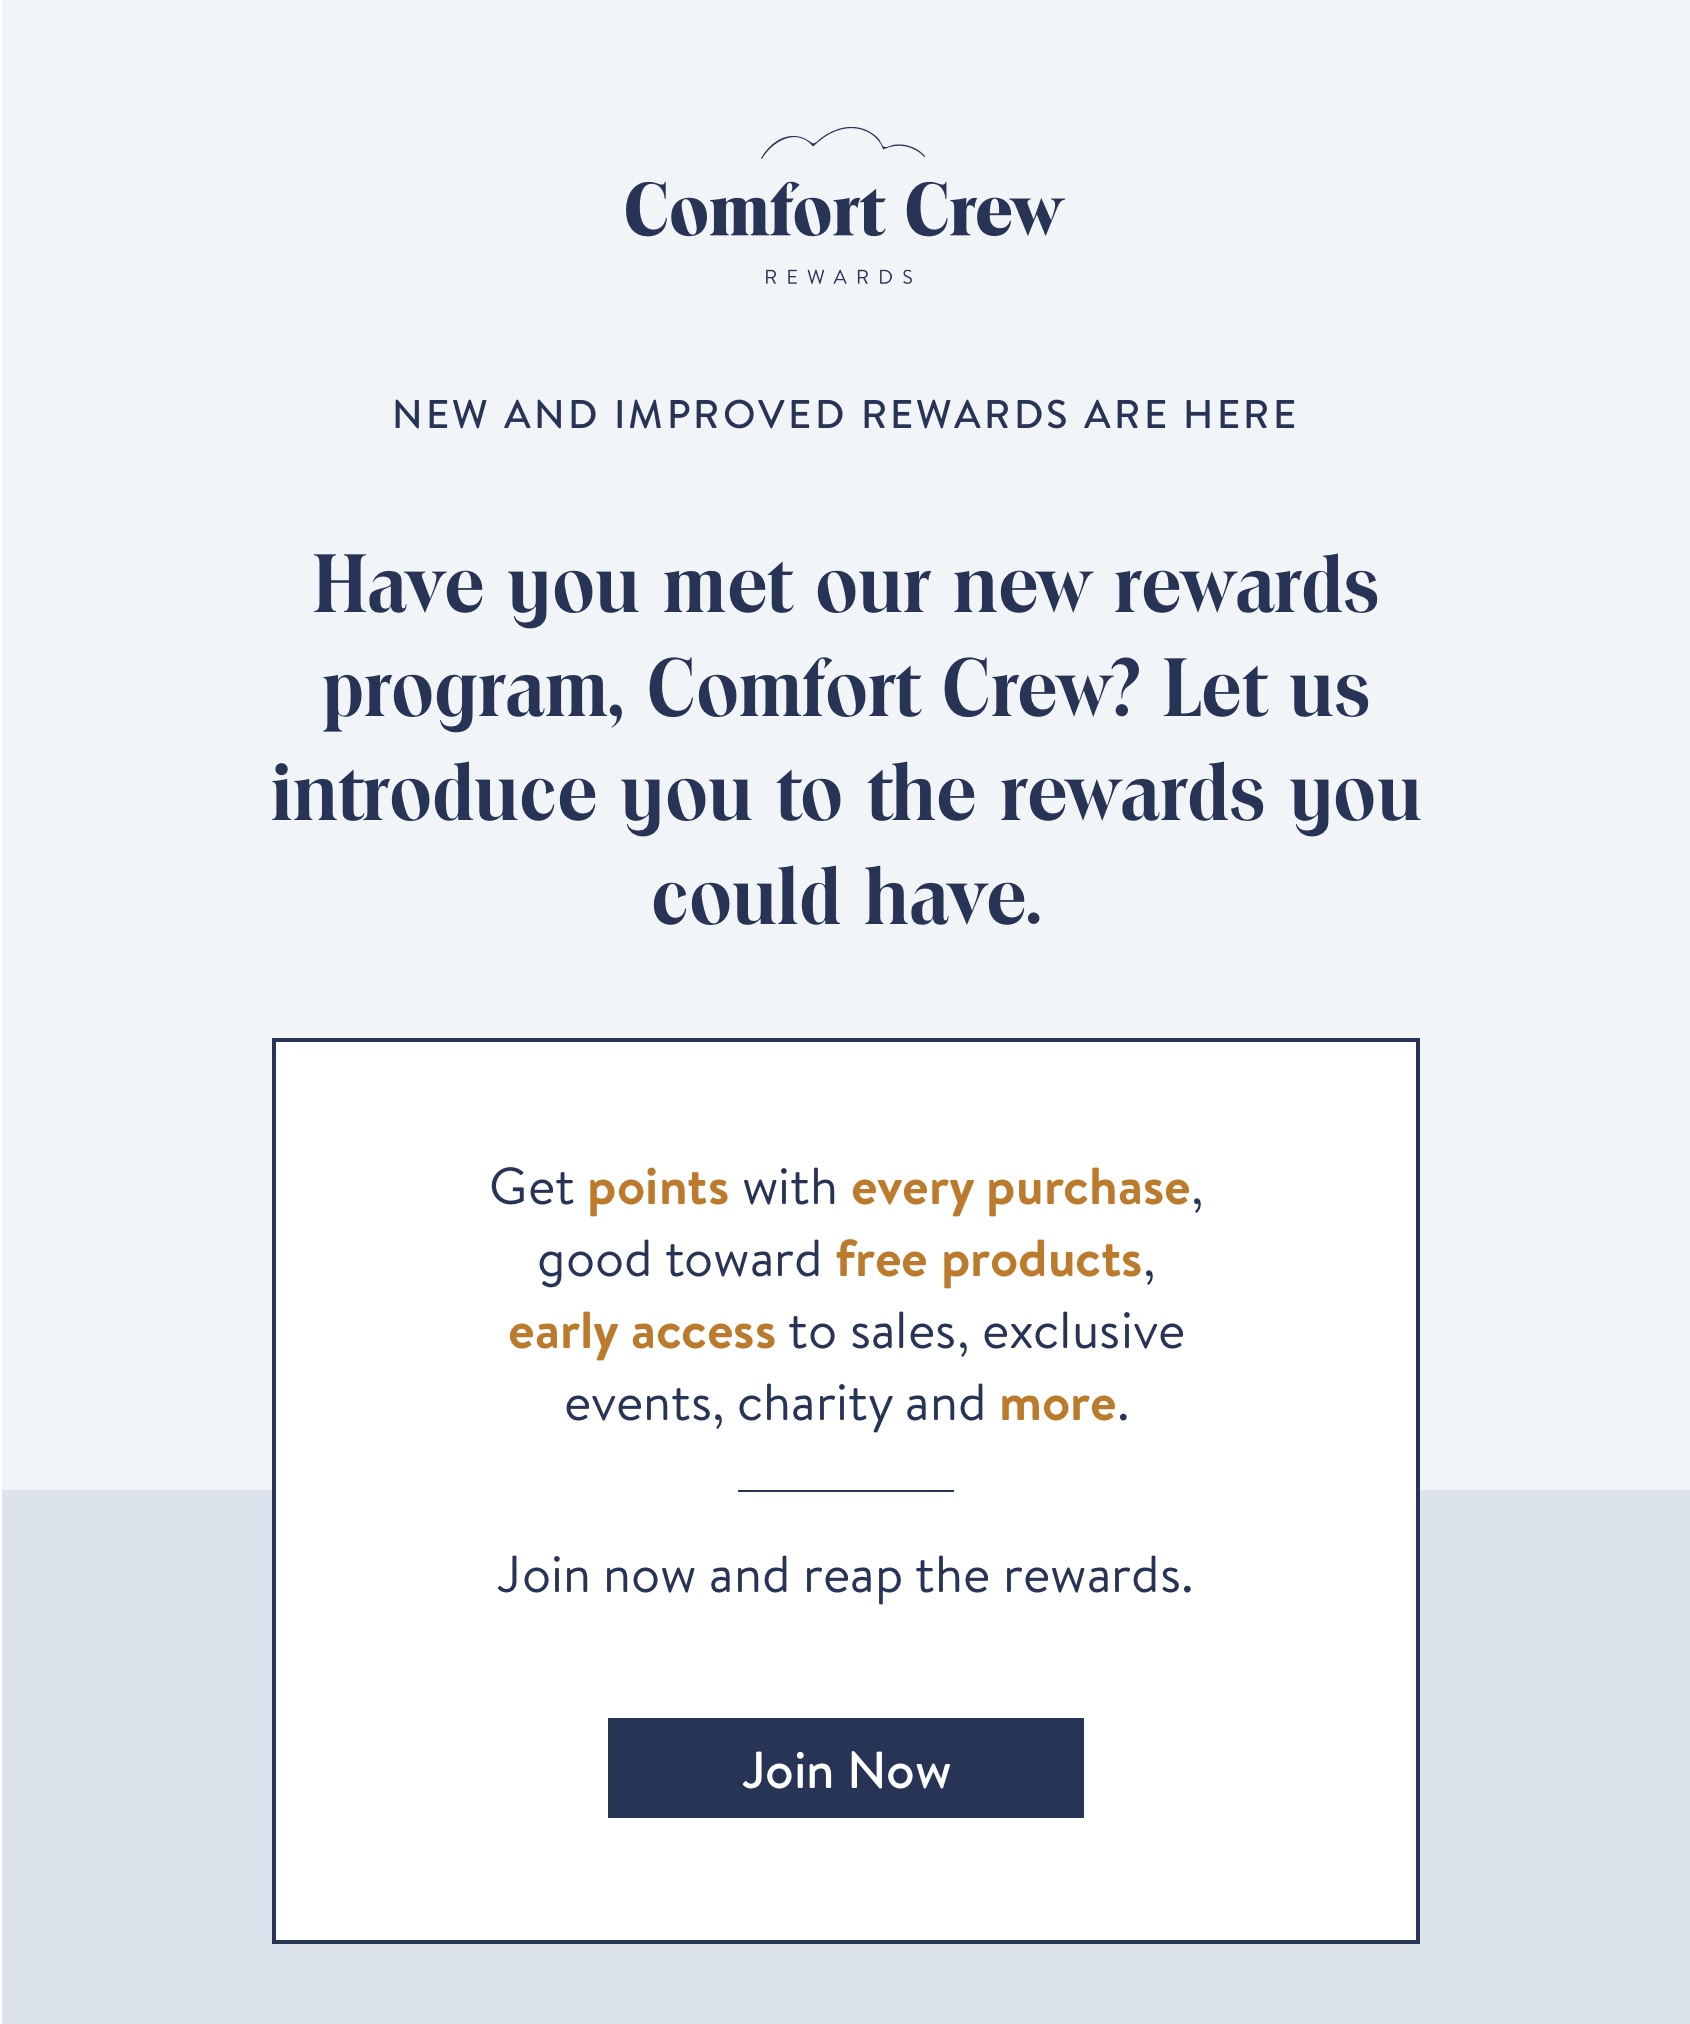 Meet our new rewards program, Comfort Crew. Then, introduce yourself to the rewards you could have.